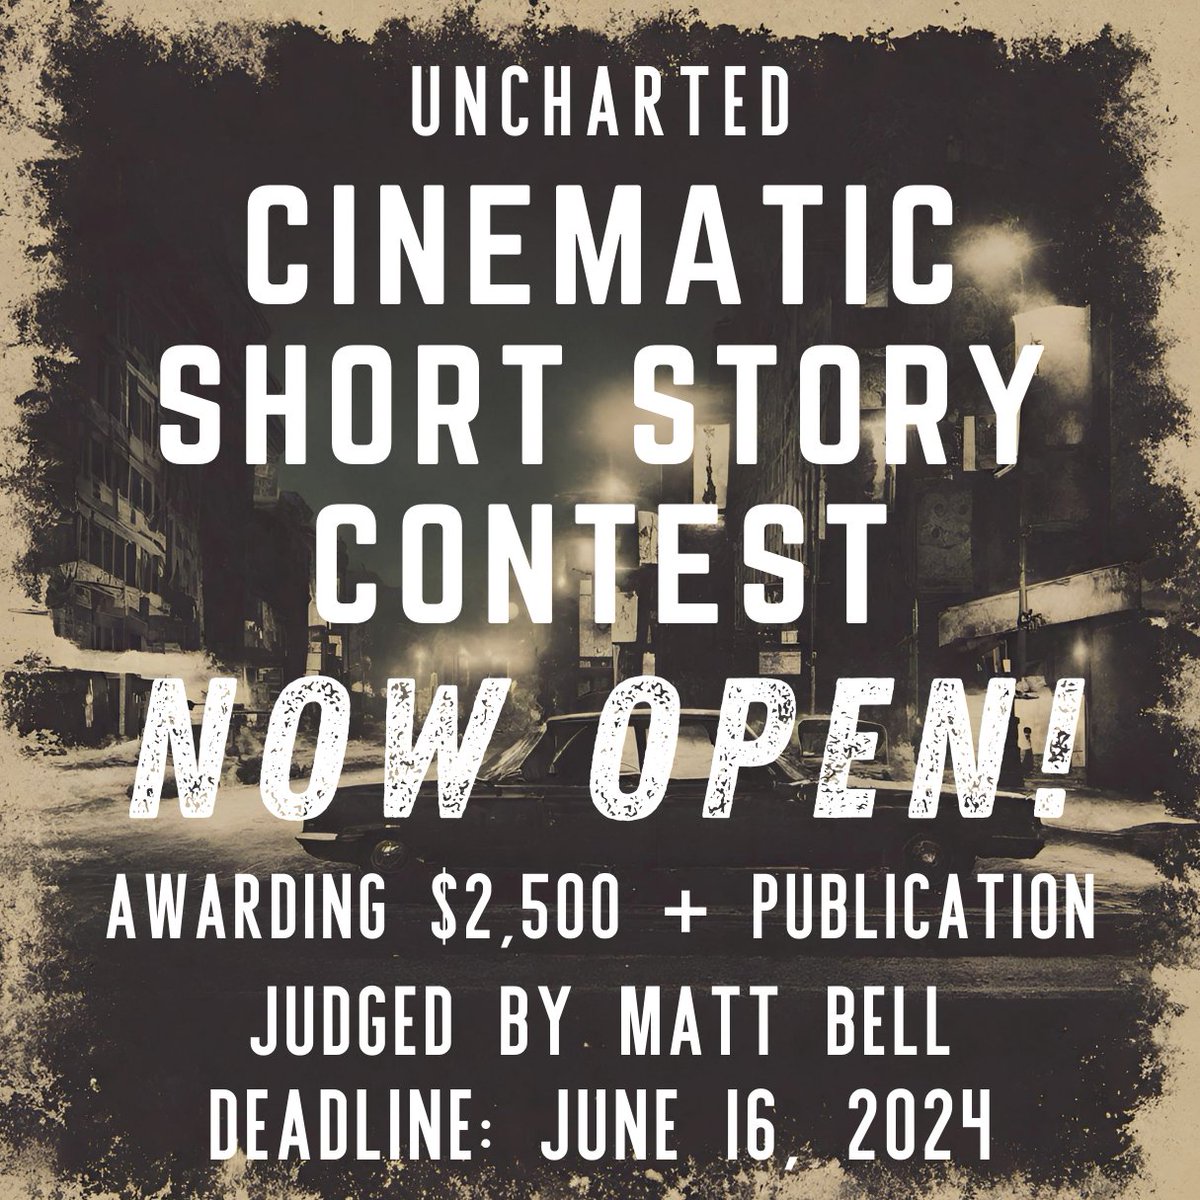 We invite writers to submit to the Uncharted Magazine Cinematic Short Story Contest! Guest Judge @mdbell79 will choose three winning stories. We’re excited to offer the first-place winner of this contest $2,000 and publication. Learn more: unchartedmag.com/uncharted-maga…